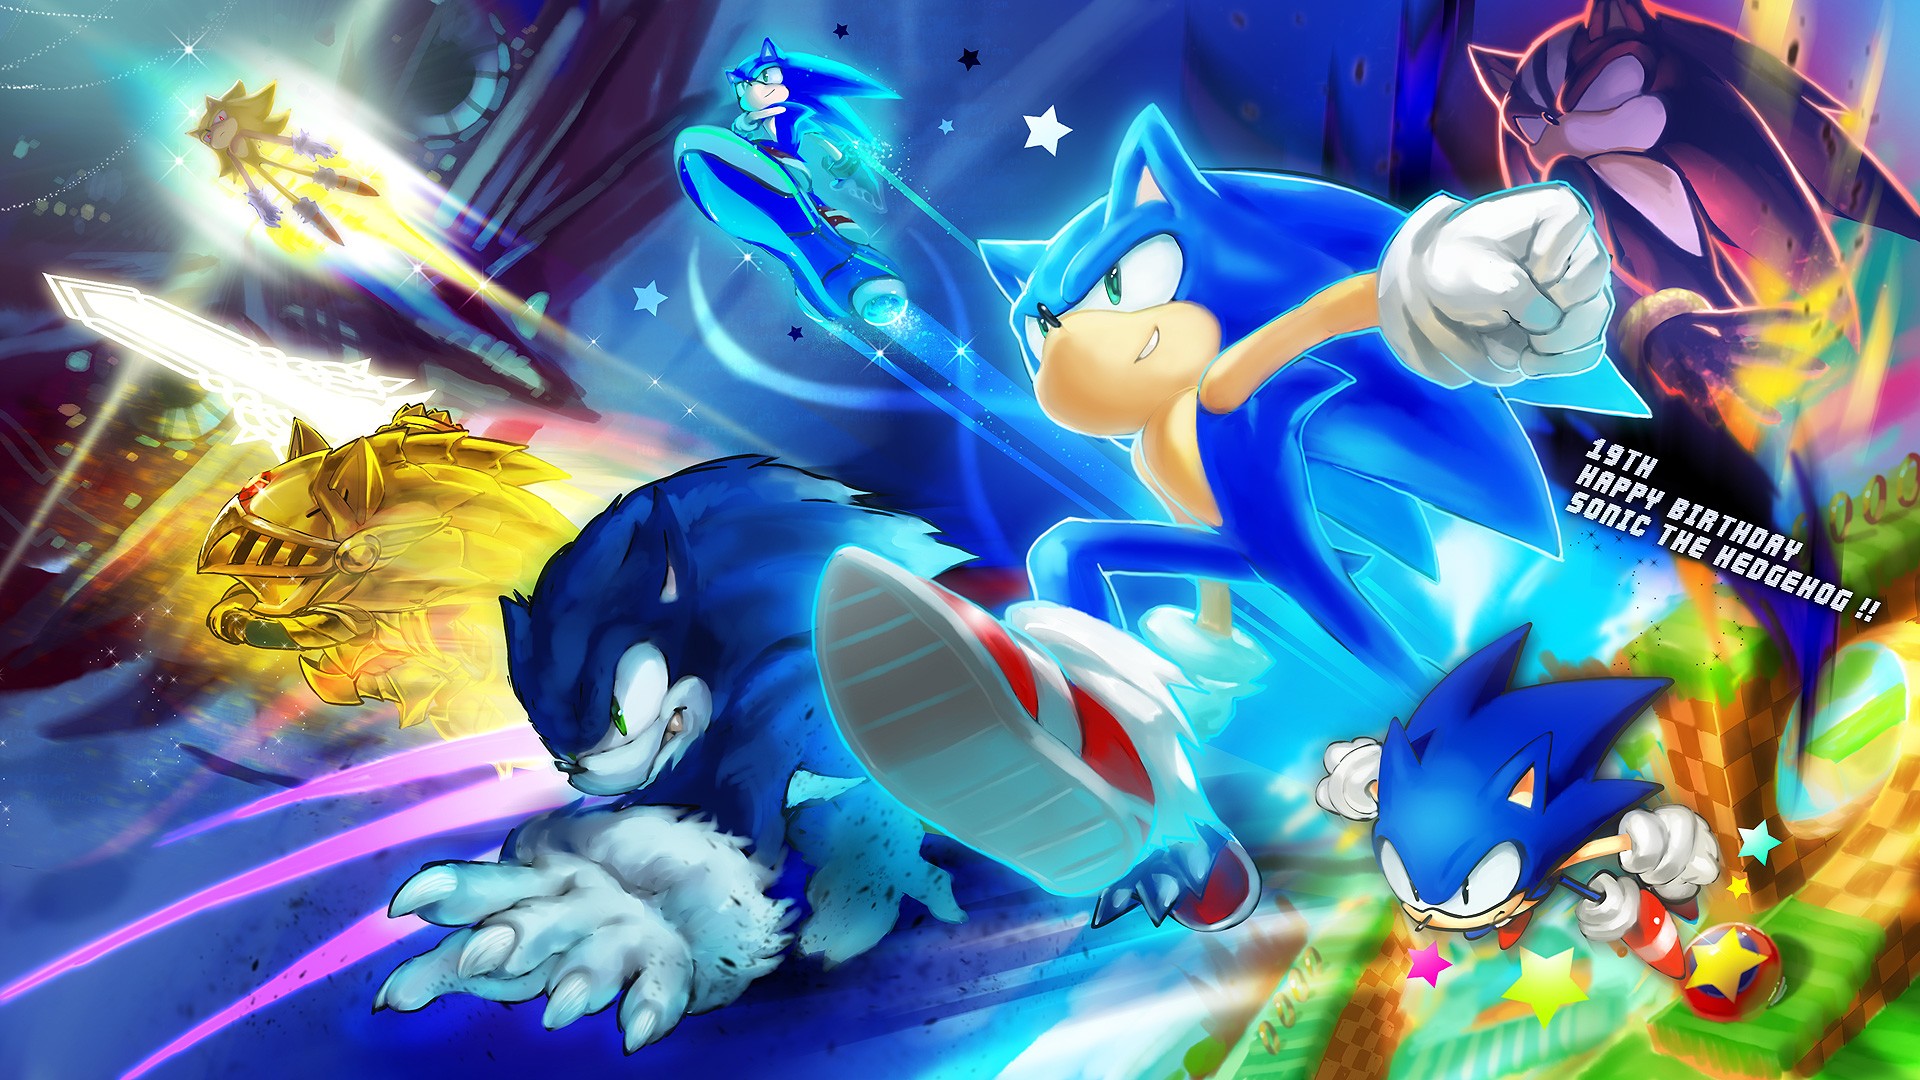 Sonic wallpaper HD backgrounds download.